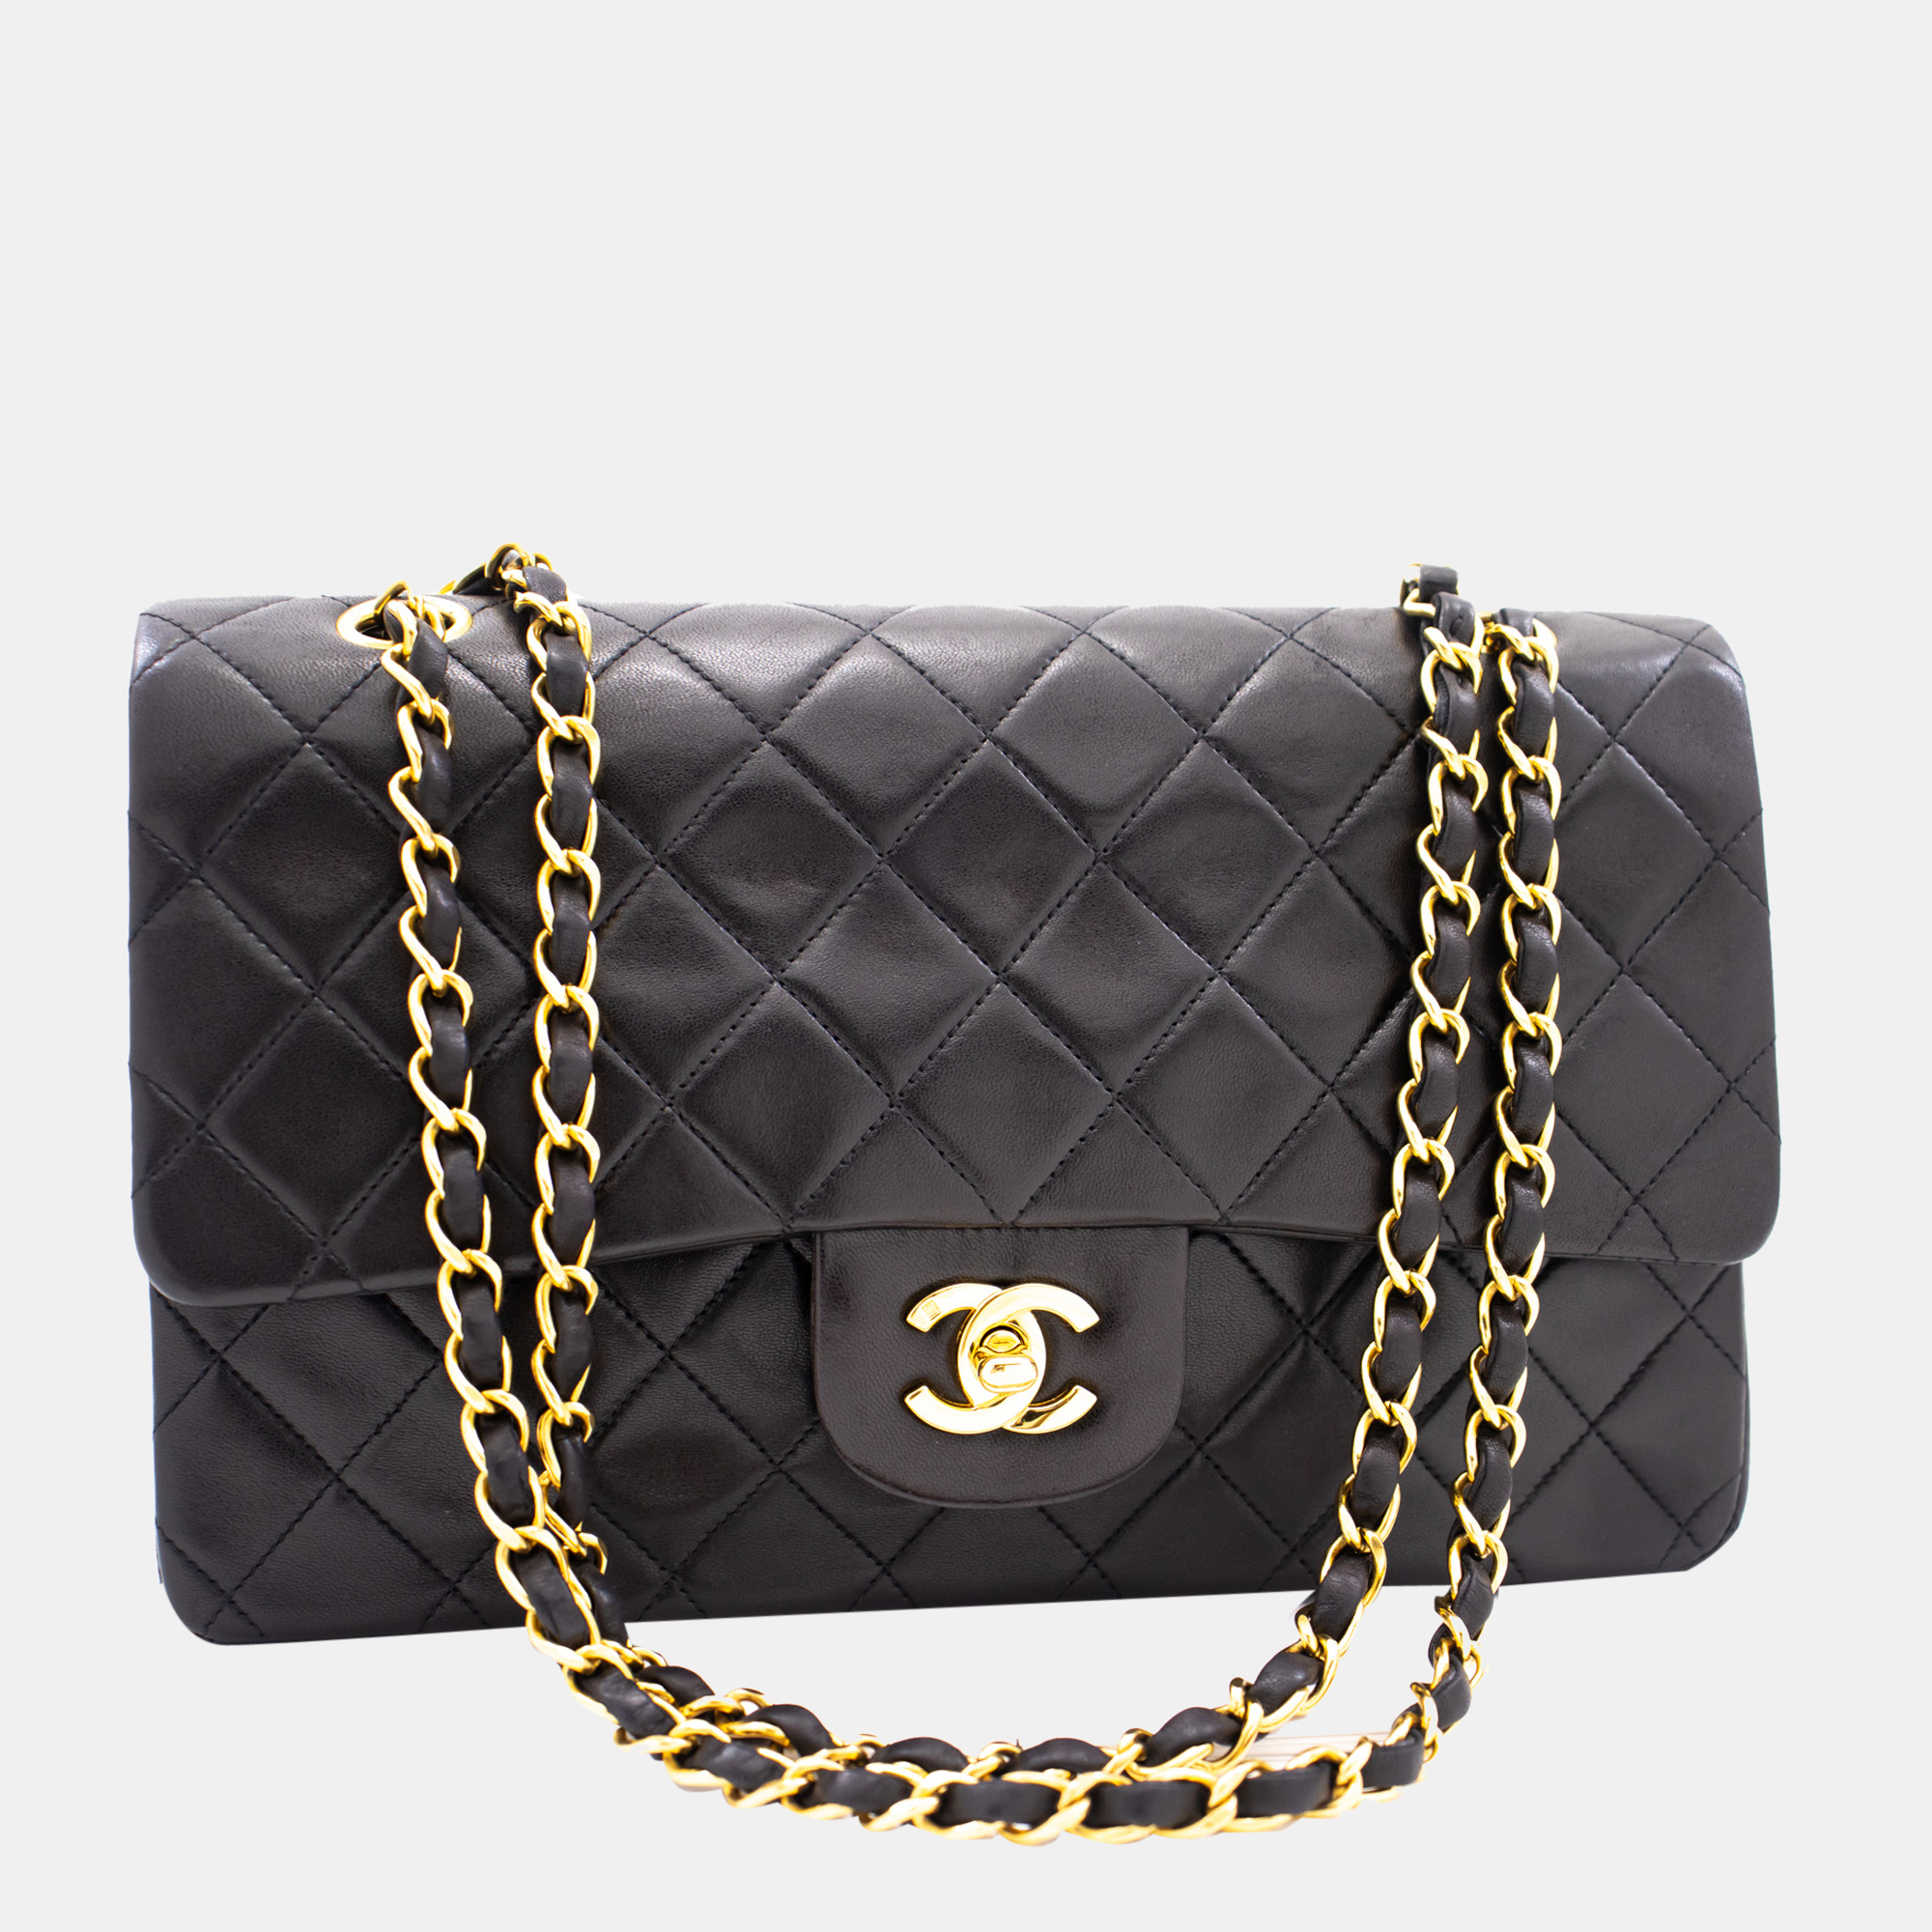 Pre-owned Chanel Black Leather Vintage Jumbo Classic Double Flap